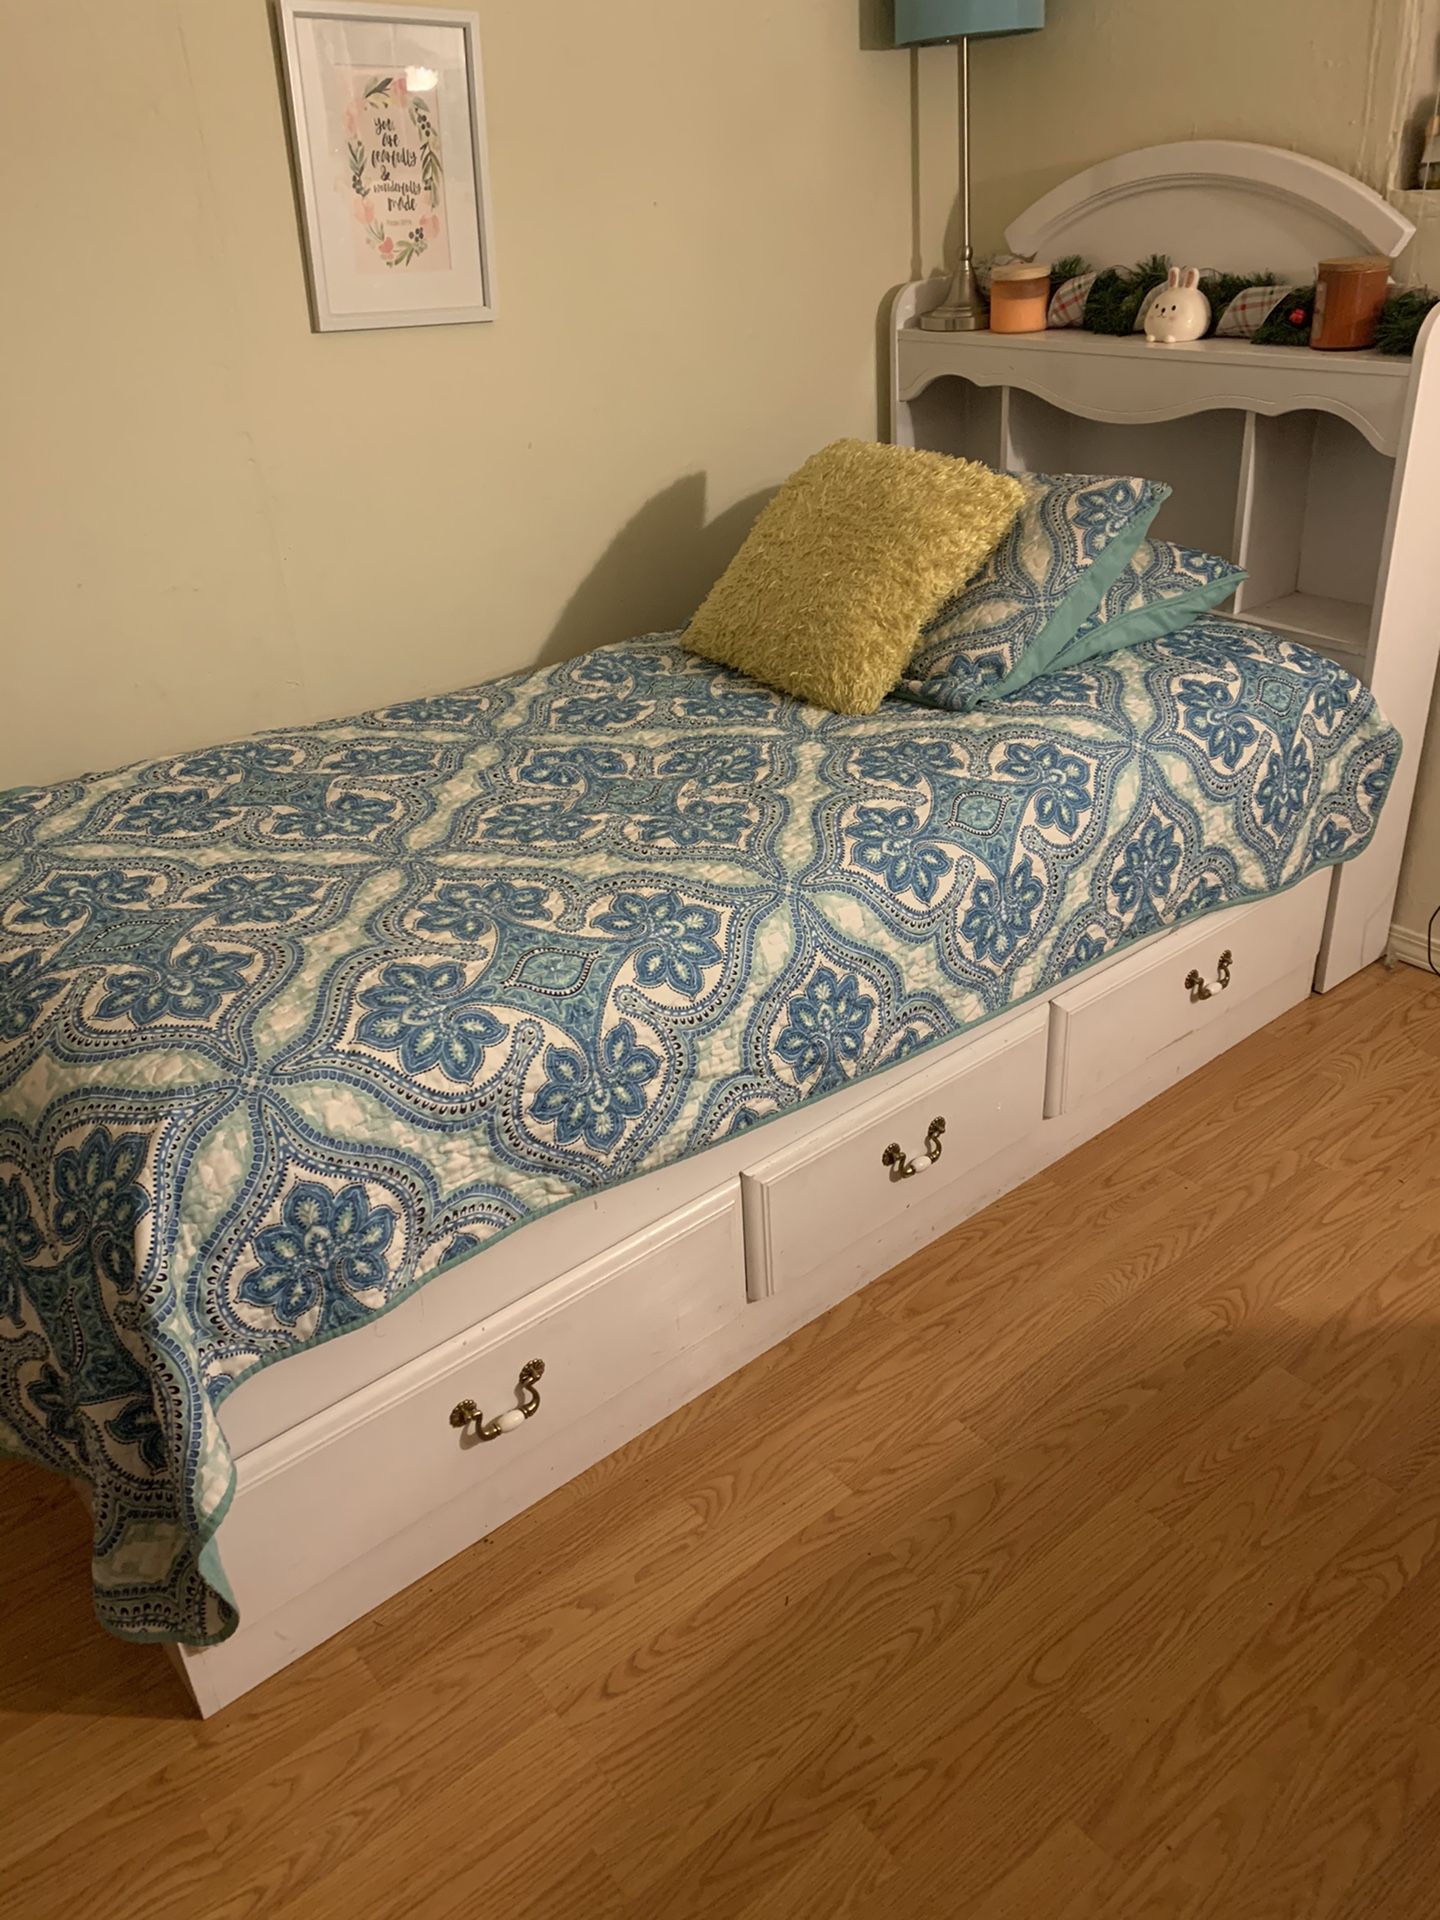 Twin bed frame and head board